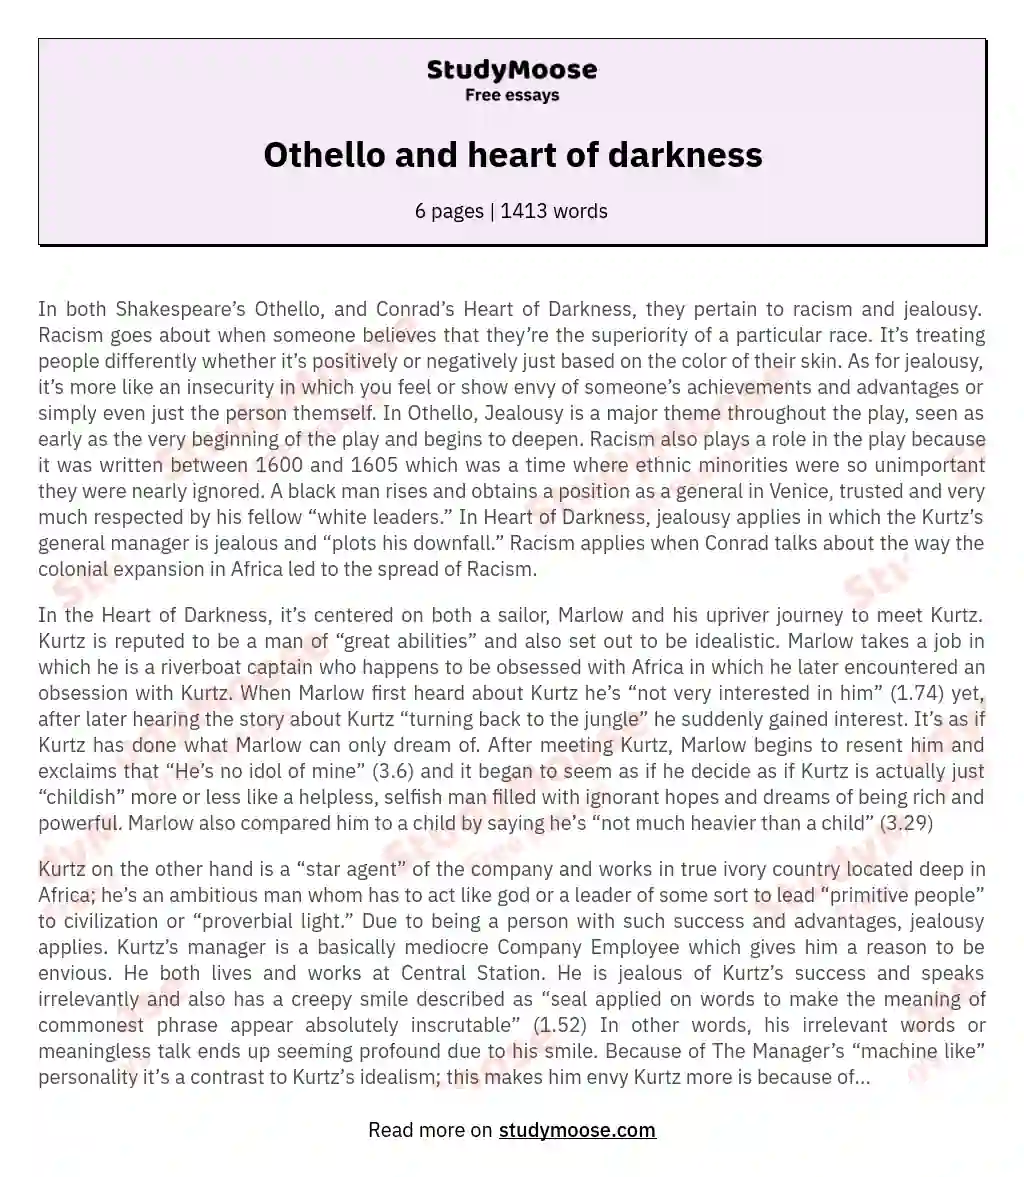 Othello and heart of darkness essay